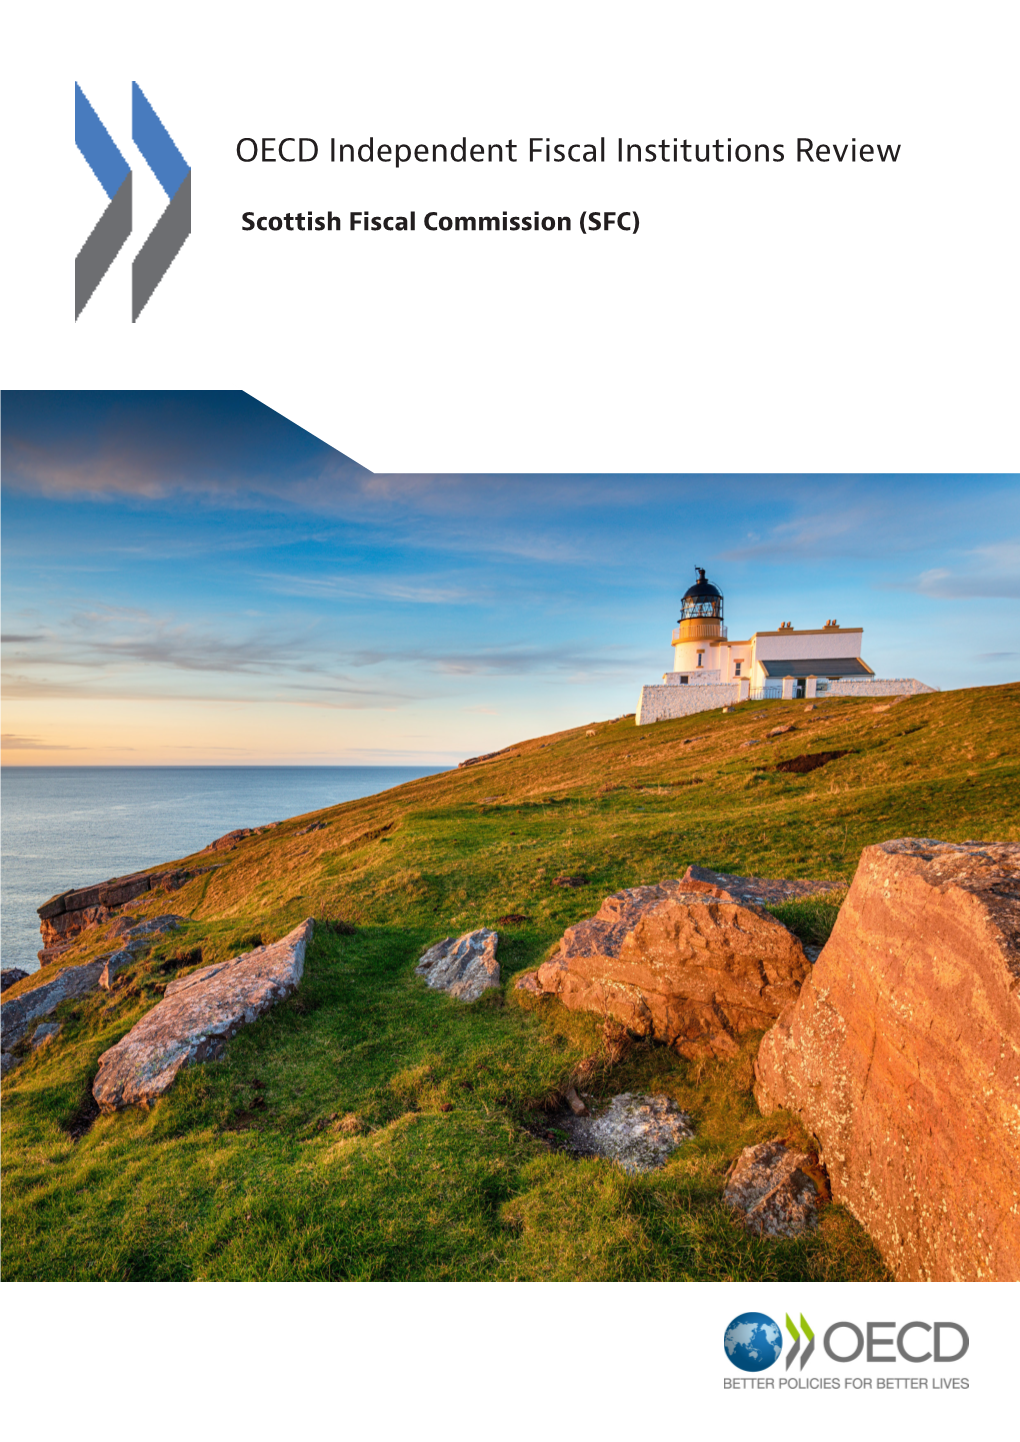 OECD Independent Fiscal Institutions Review